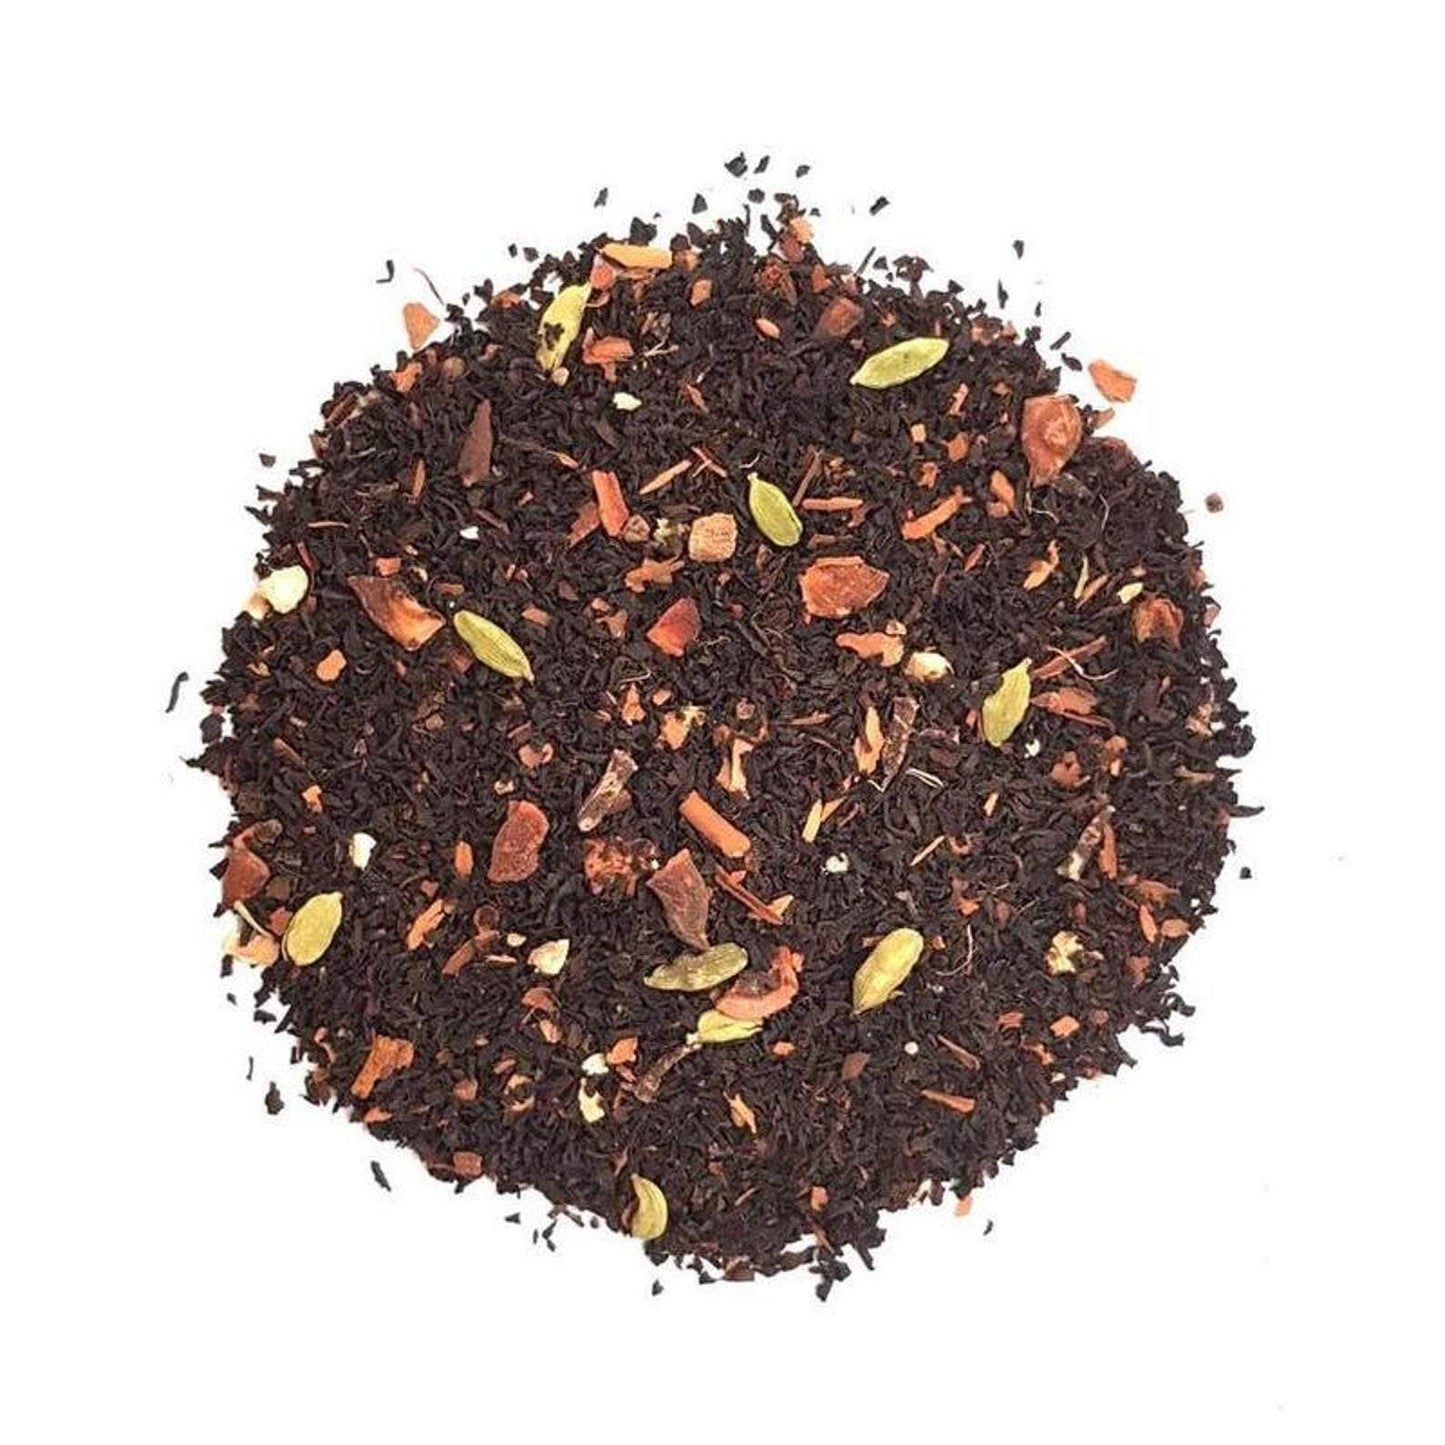 Our Caramel Masala Chai tea, is the perfect gift for any tea lover. Best loose leaf tea / best tasting Australian tea. An exceptionally calming, sweet and spicy chai loose-leaf tea, which is best enjoyed with milk to provide an unrivalled taste sensation! This Authentic Masala Chai tea is an exquisite blend. 